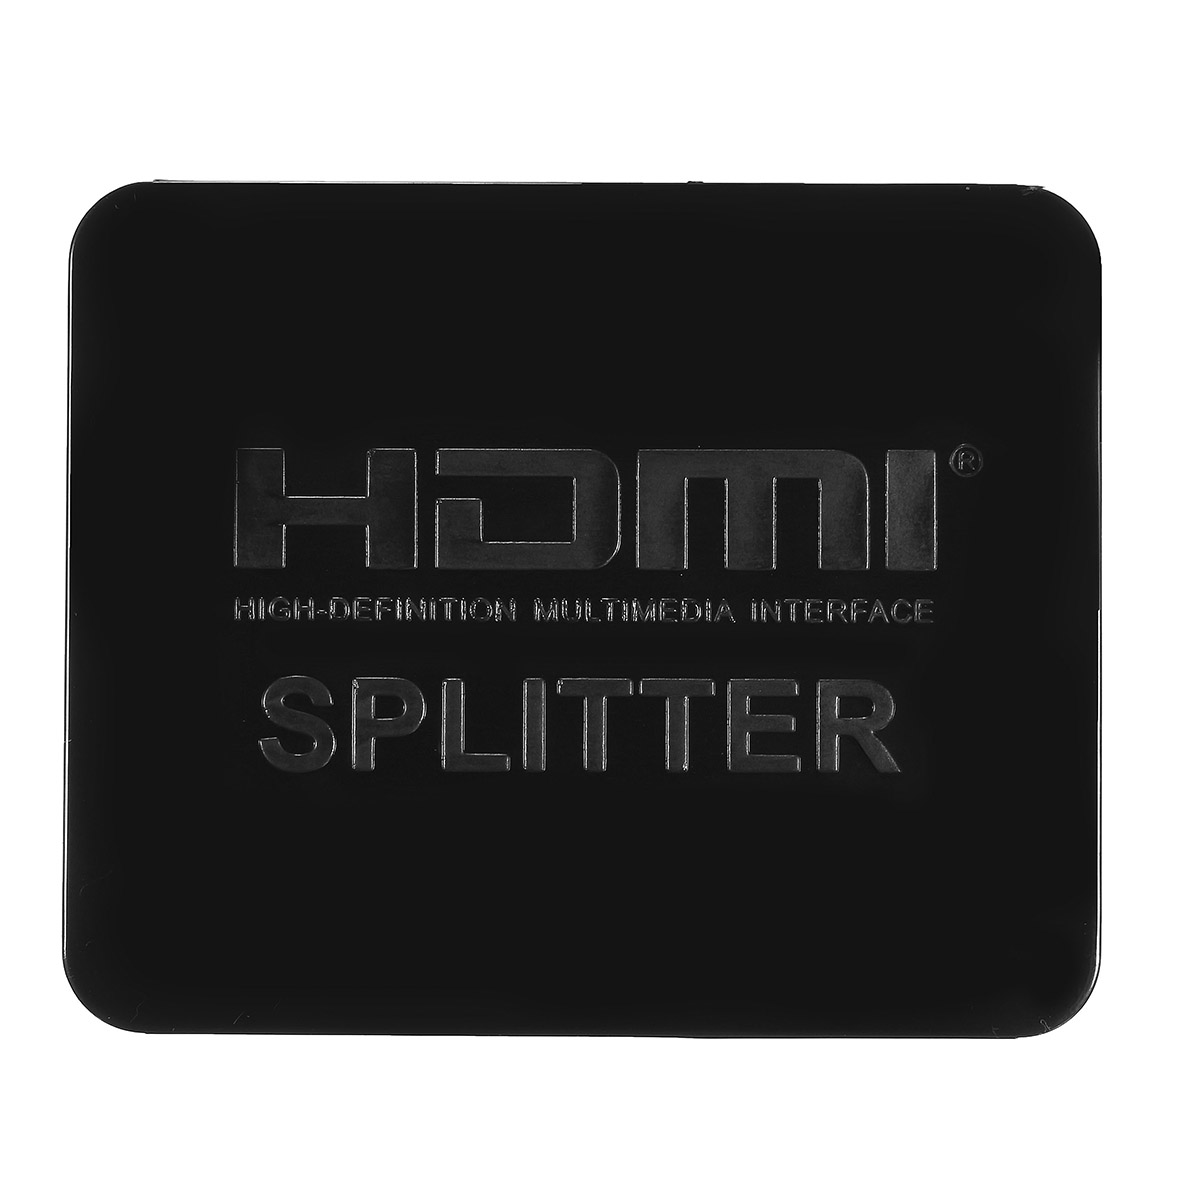 1080p Hd 1 In 2 Out Splitter Switcher Support 3d Black For Hdtv